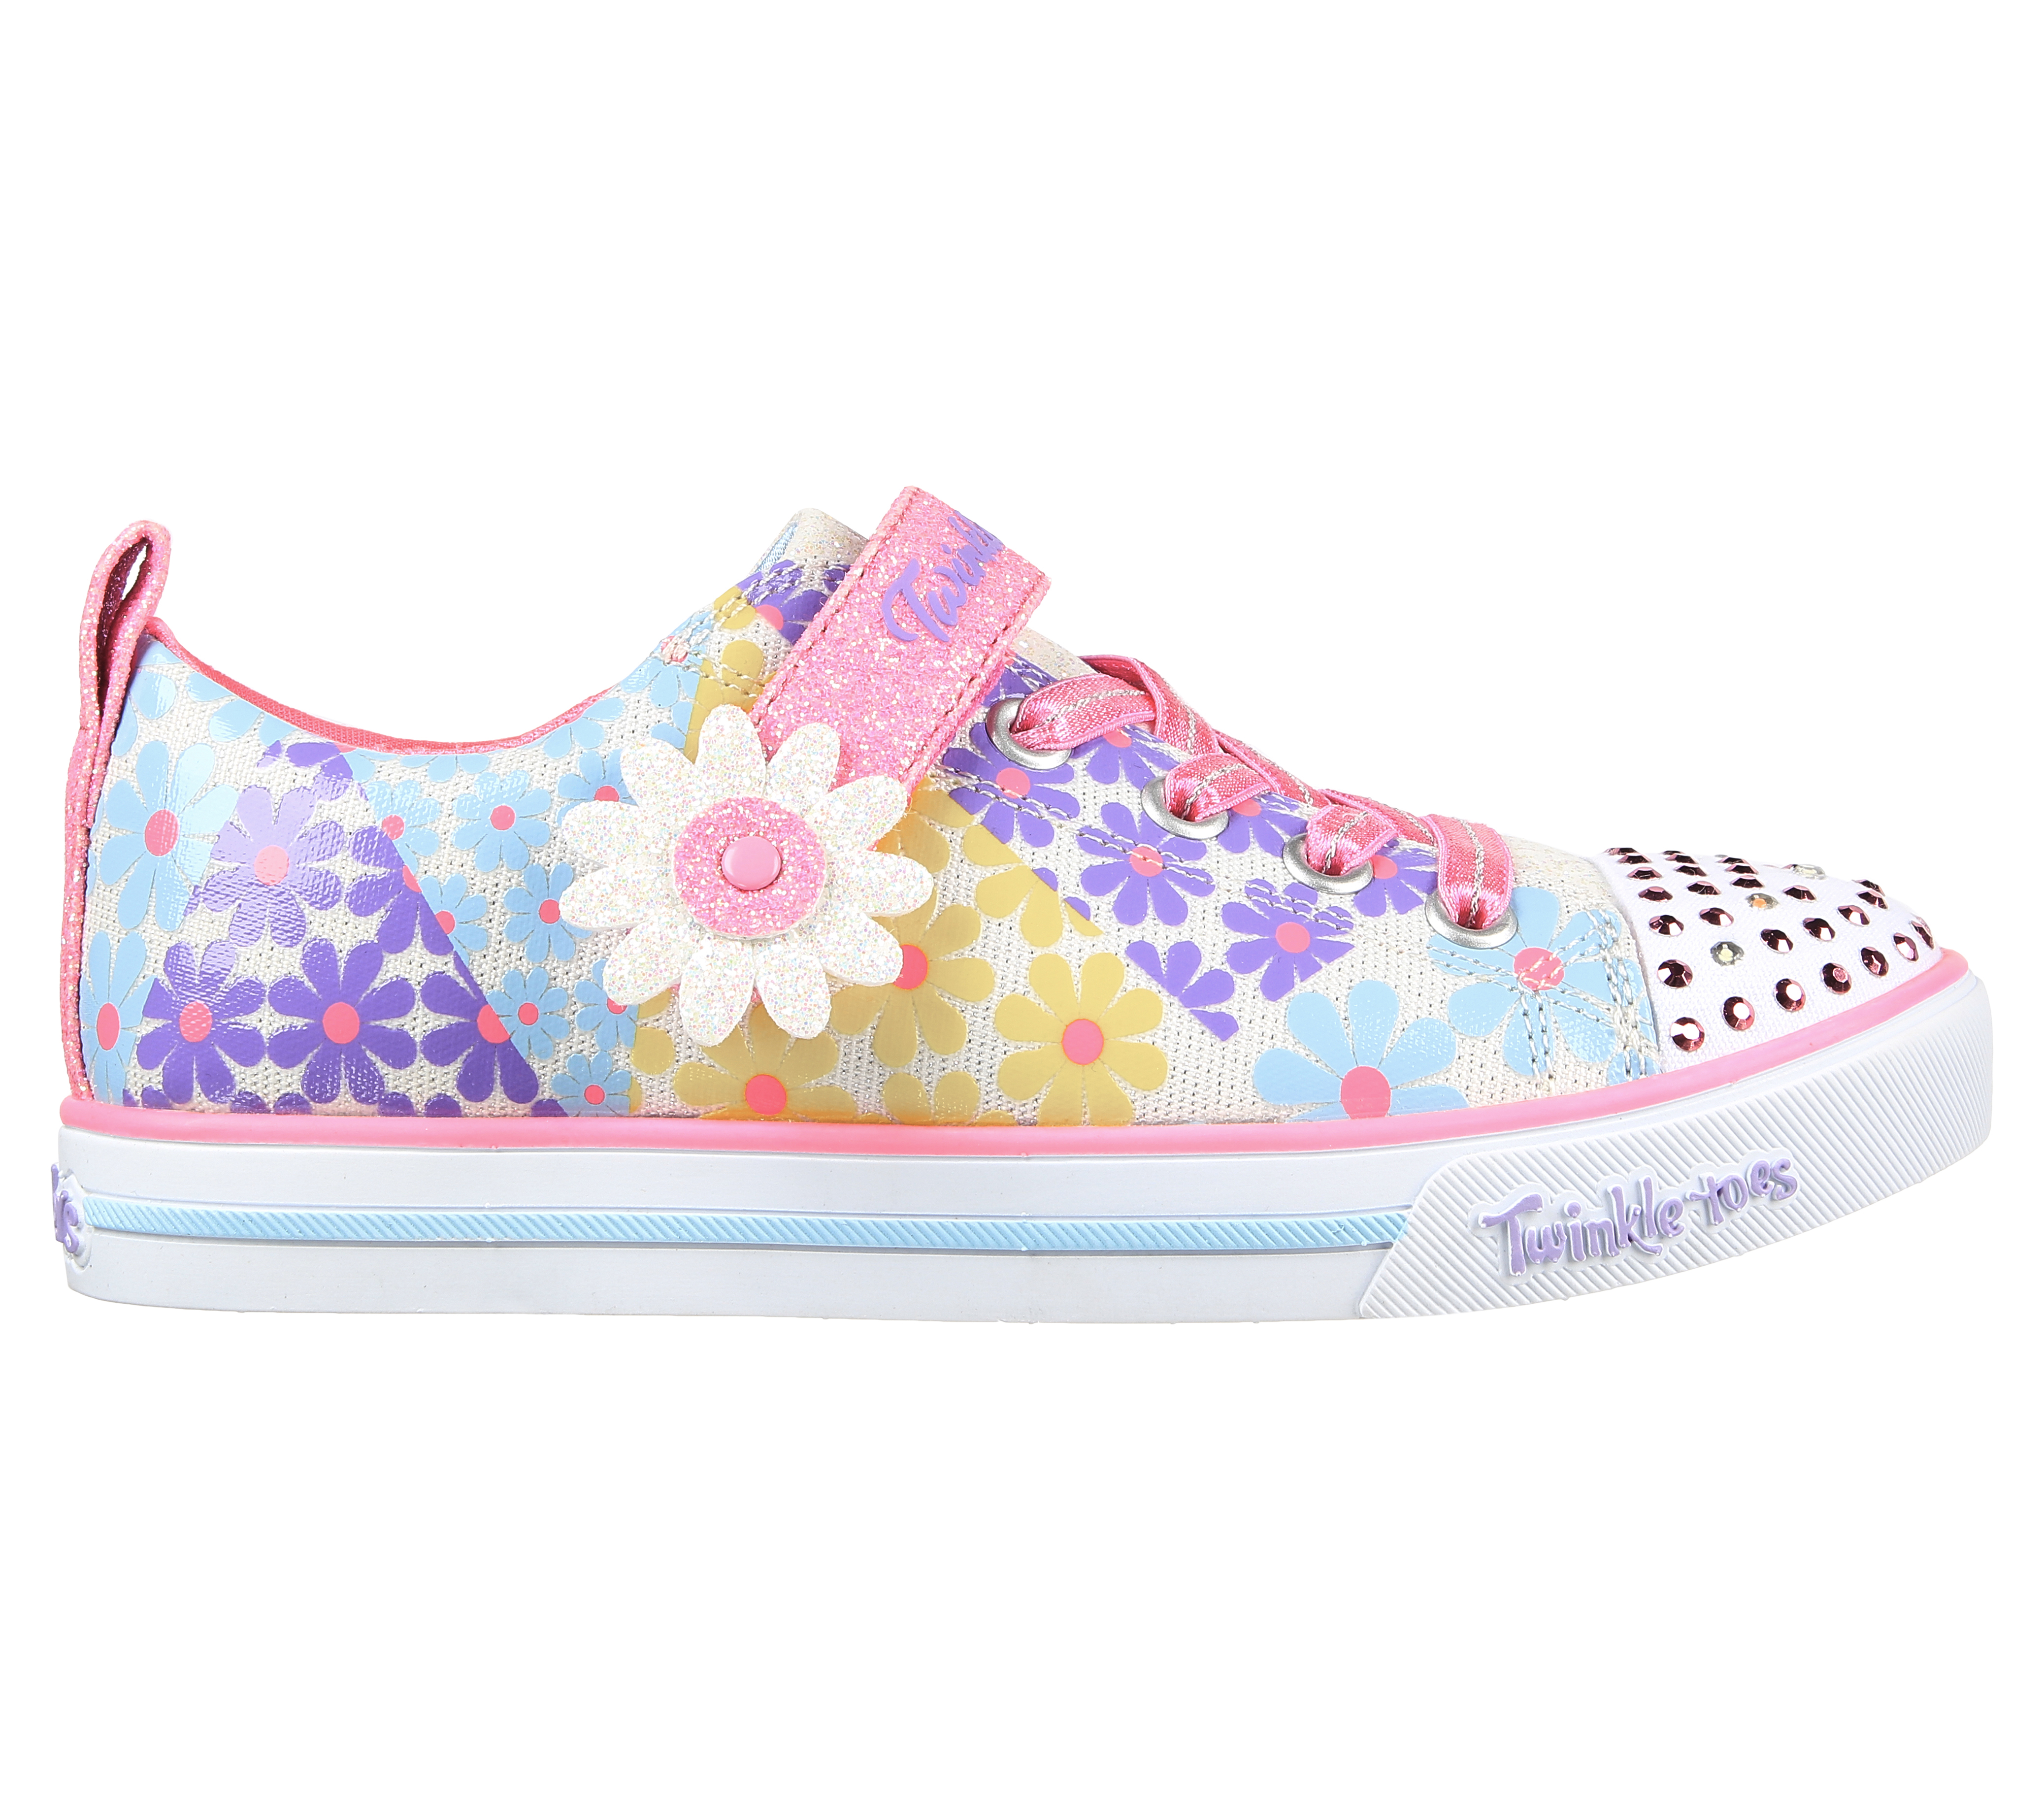 Shop the Girl's Twinkle Toes: Sparkle 